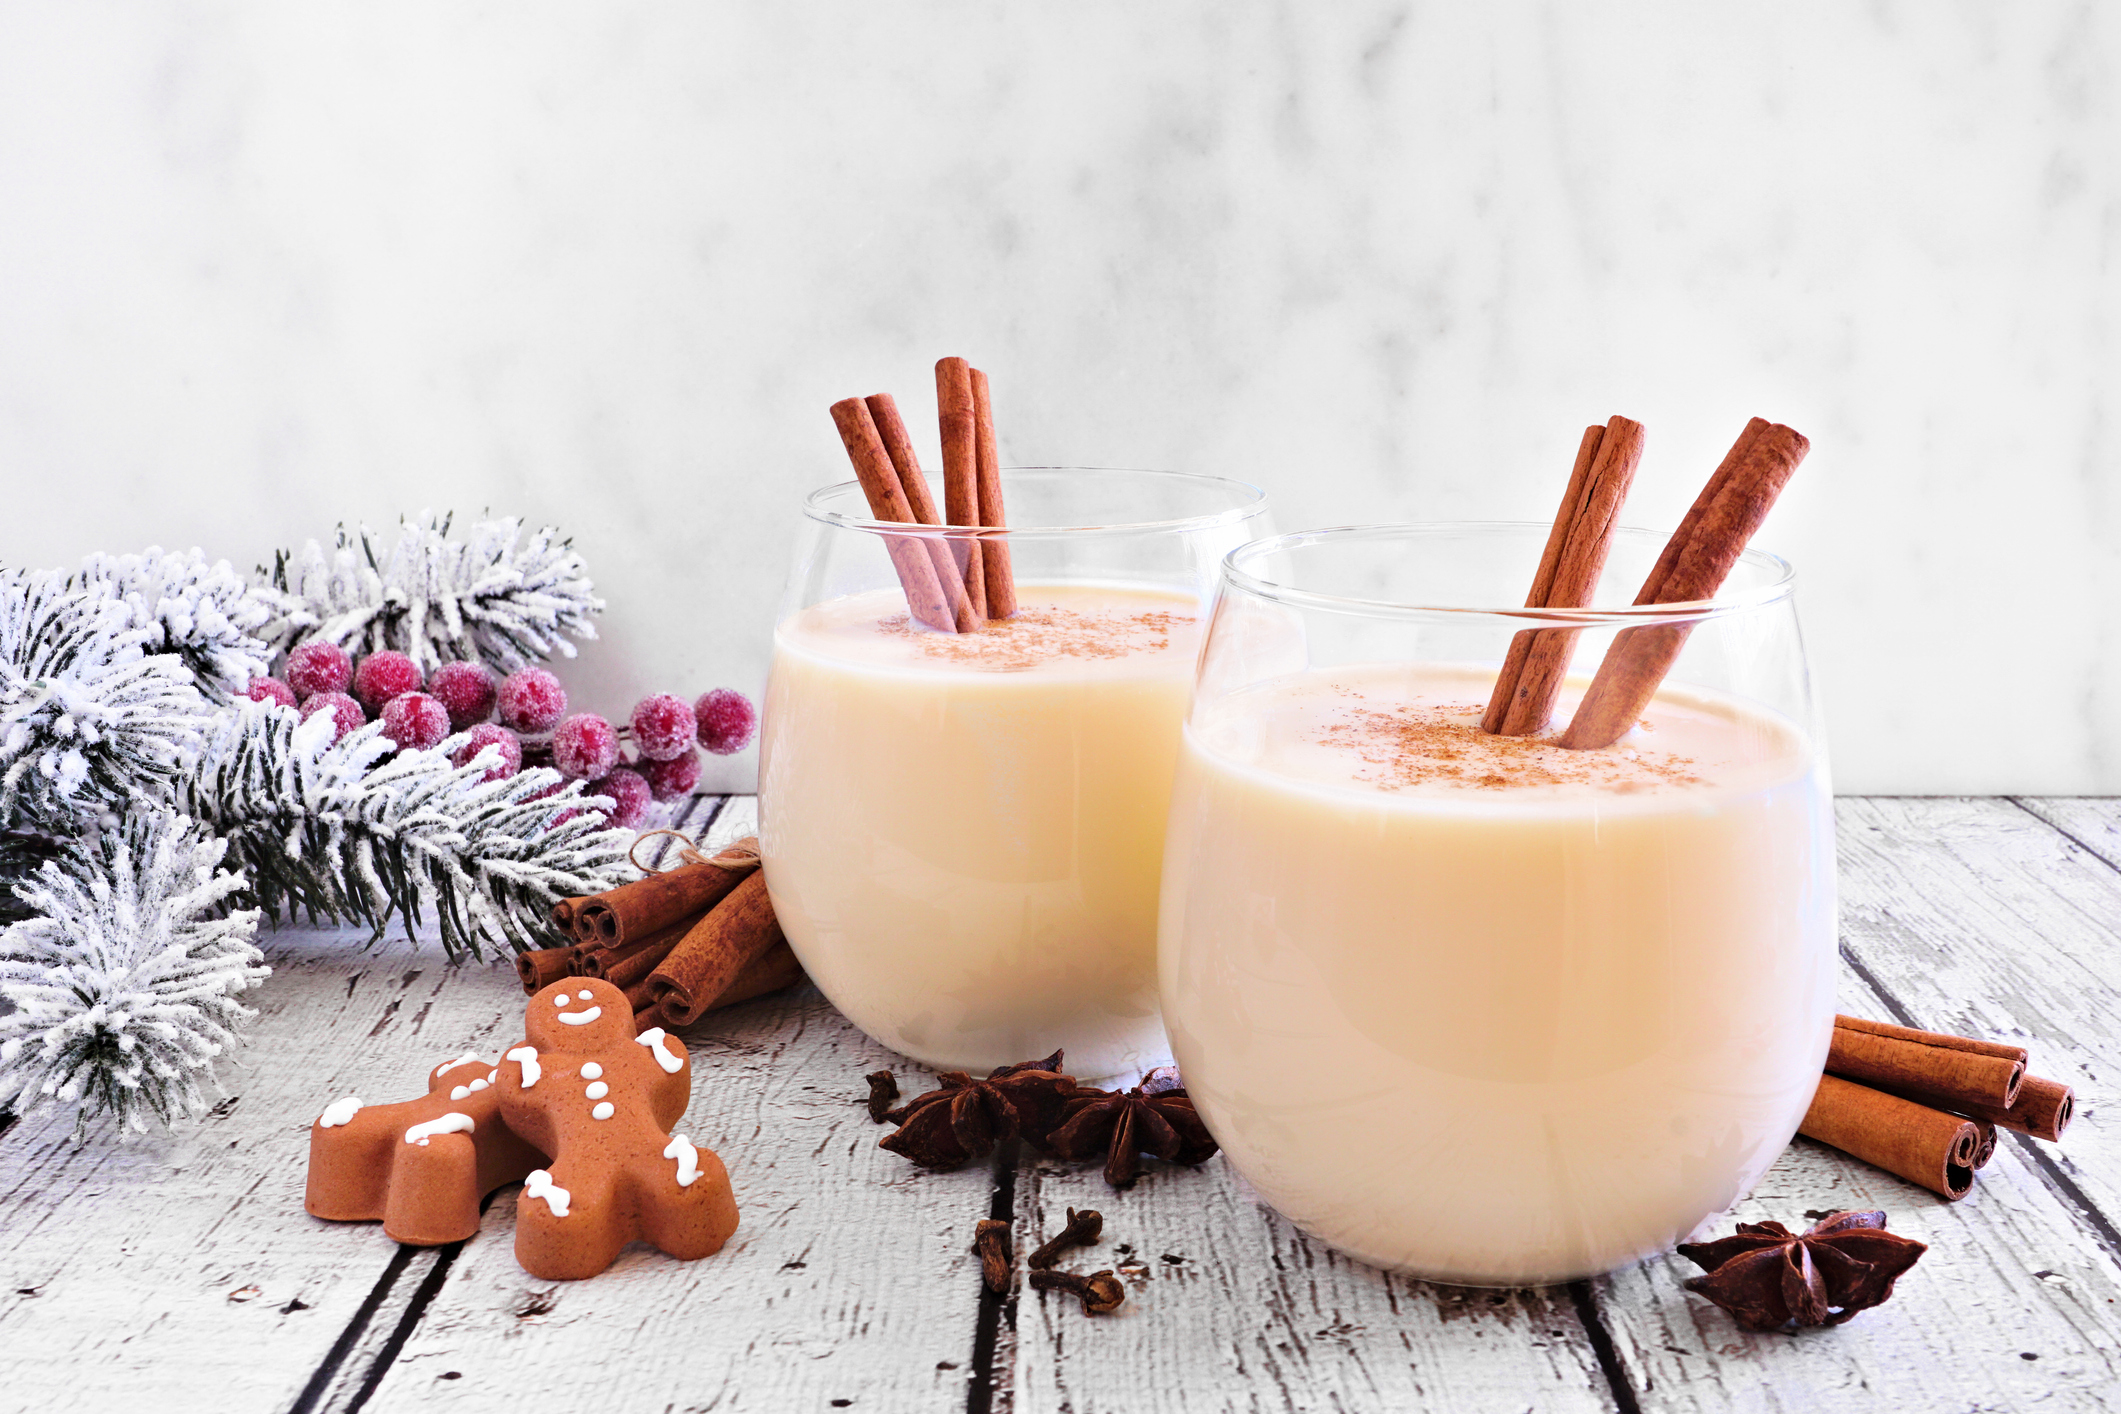 Winter 2022 Flavor trend Spiced Christmas eggnog with gingerbread men and holiday decor against a white background